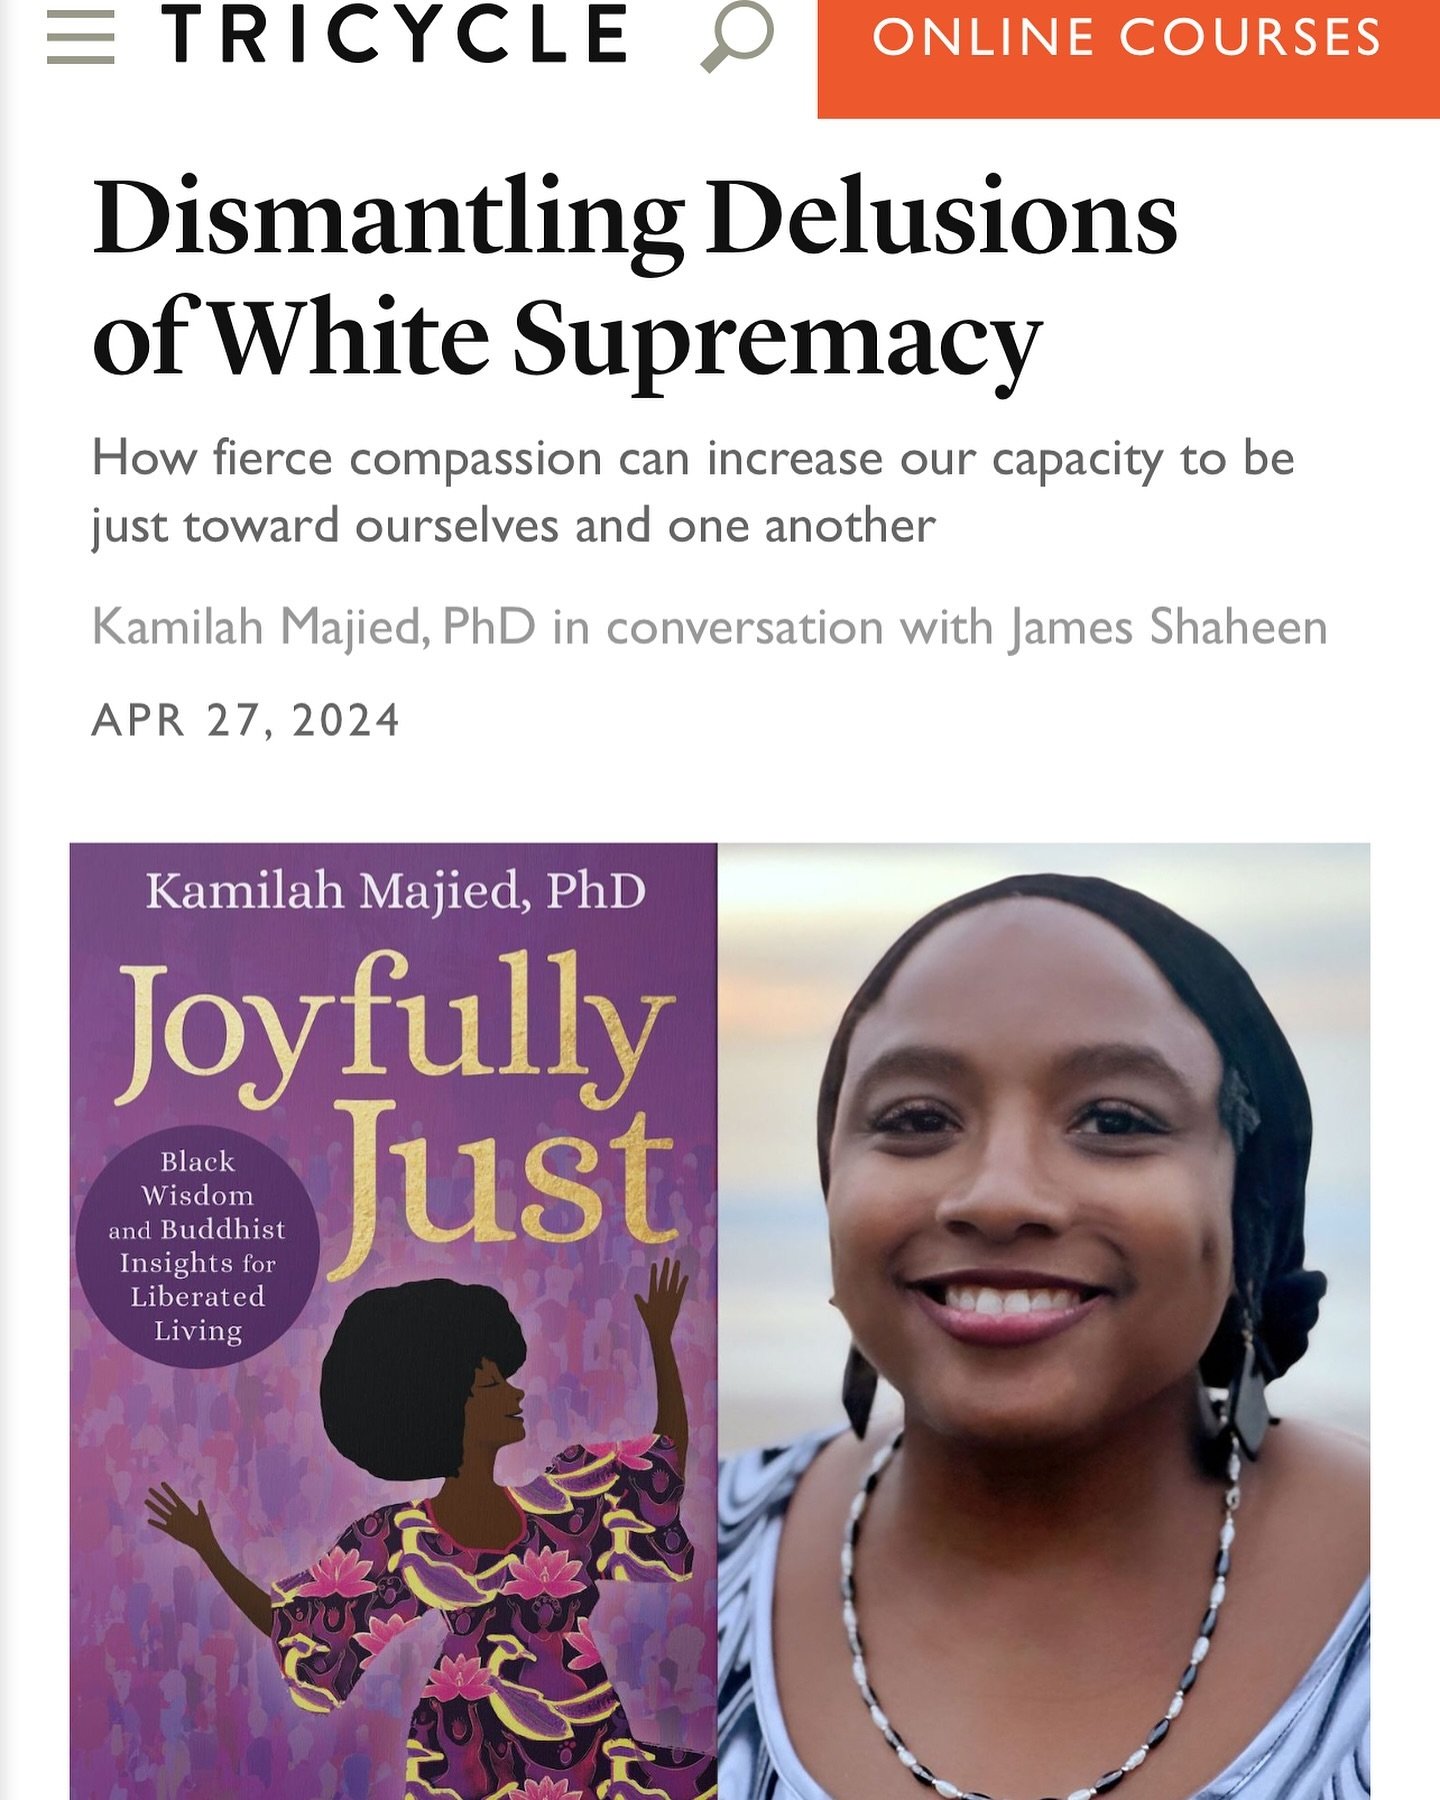 Recently I was a guest on the Tricycle Talks podcast, hosted by Tricycle&rsquo;s editor-in-chief, James Shaheen. I talked about some of the topics explored in my new book, &ldquo;Joyfully Just: Black Wisdom and Buddhist Insights for Liberated Living,